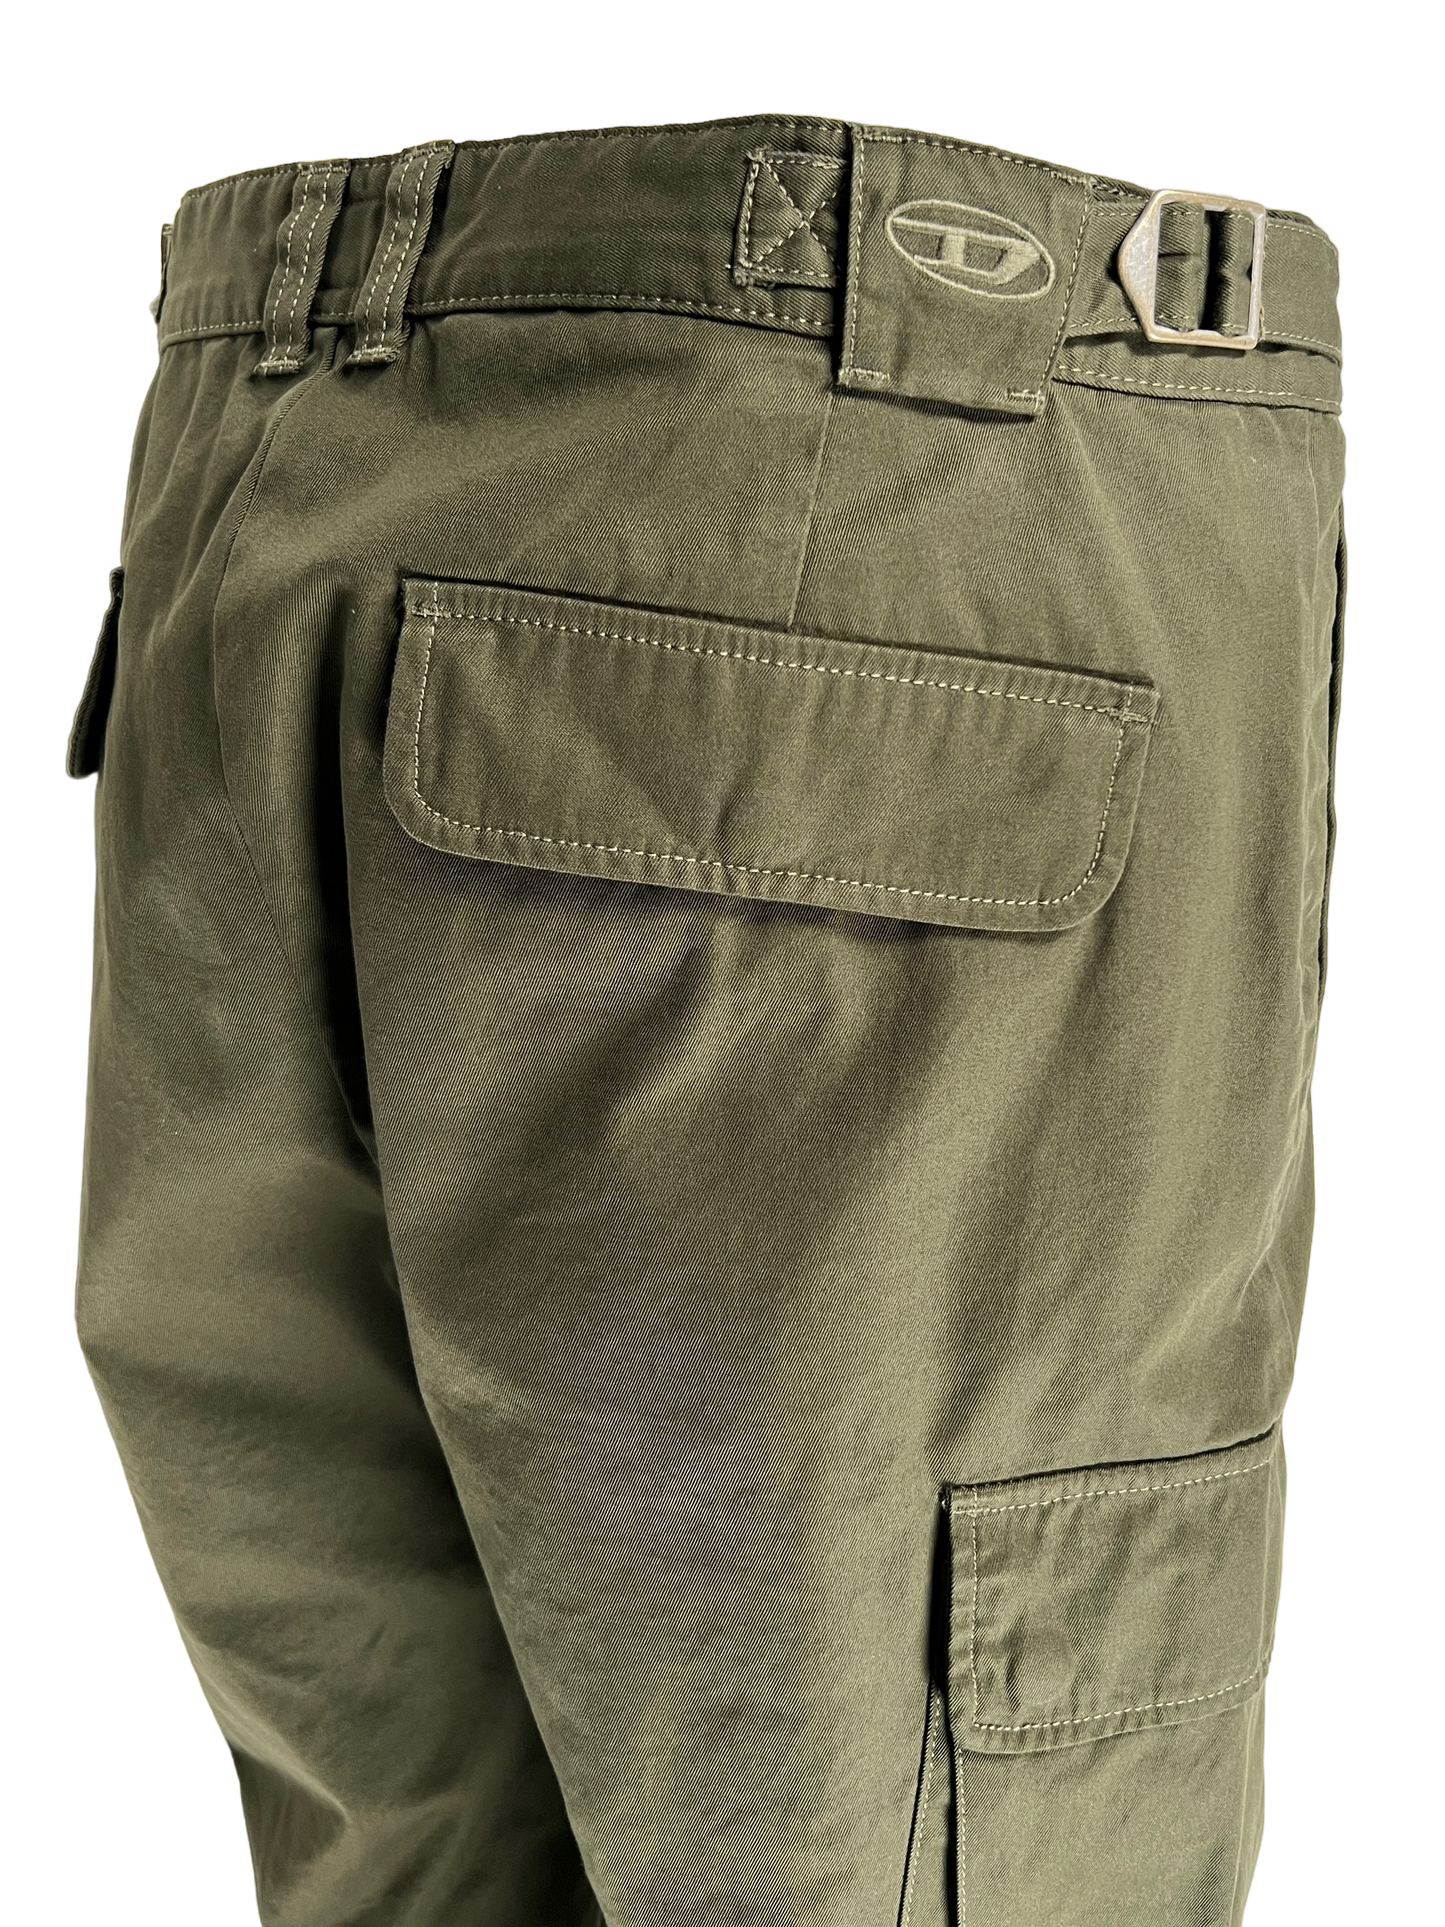 A pair of DIESEL P-ARGYM pants in olive green with organic cotton.